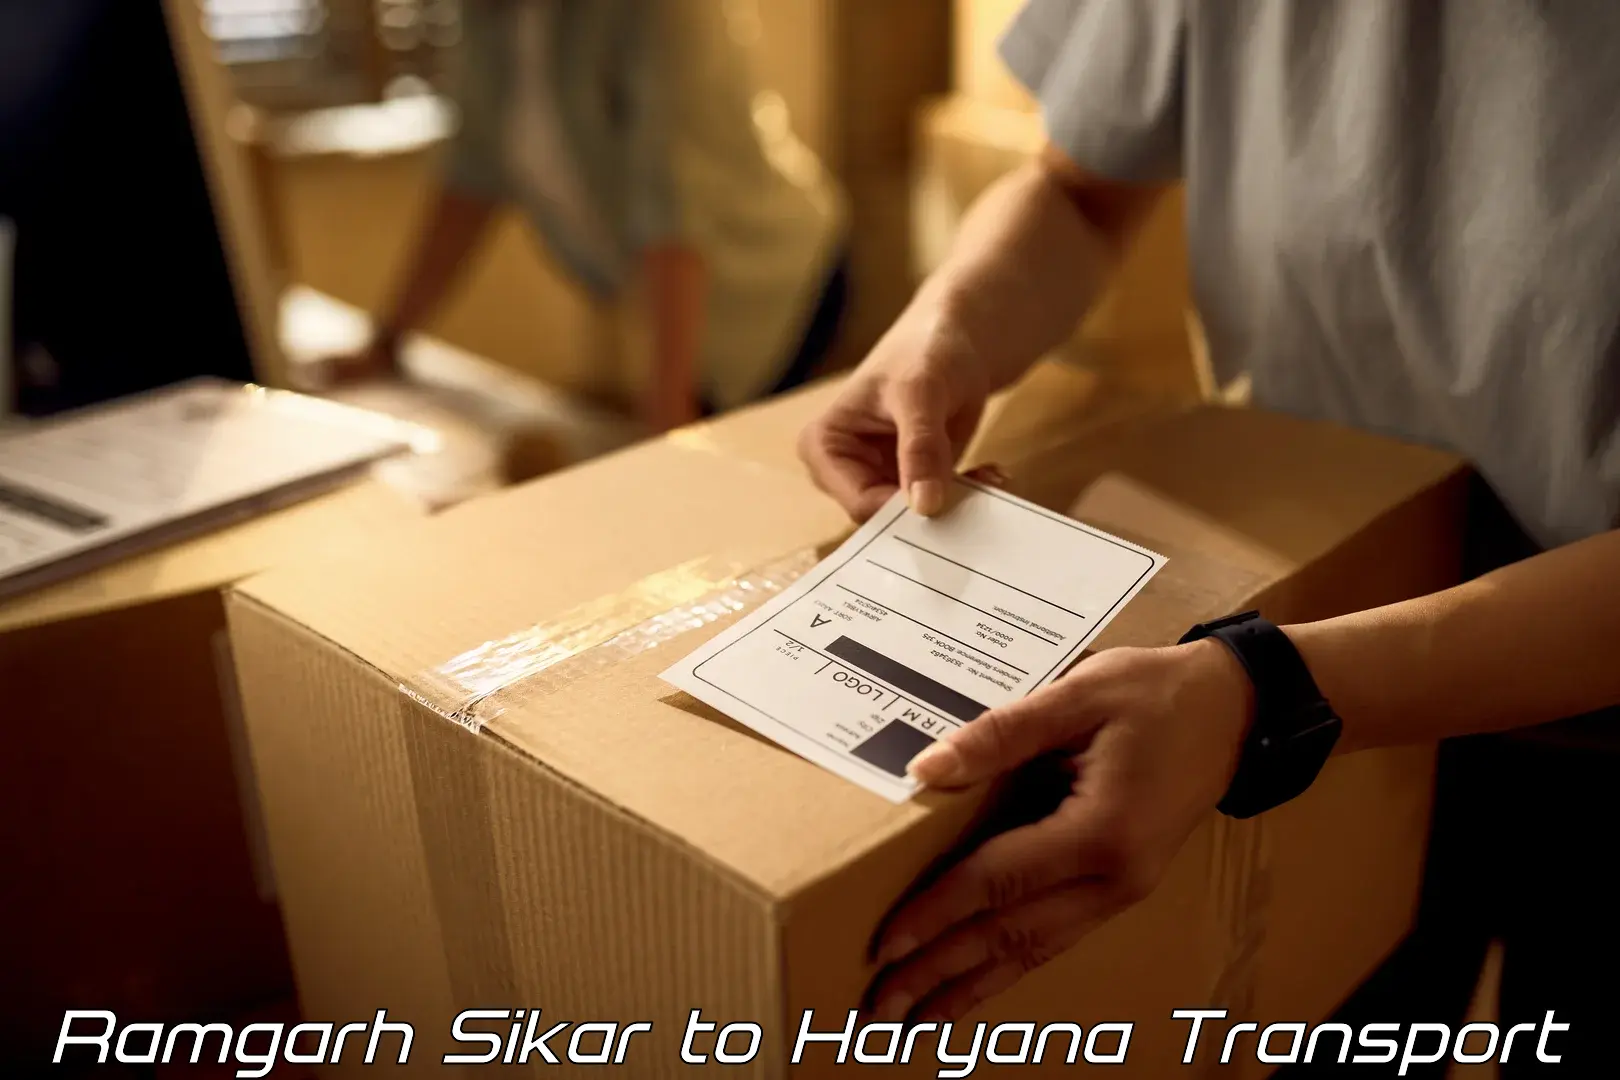 Material transport services Ramgarh Sikar to Sirsa